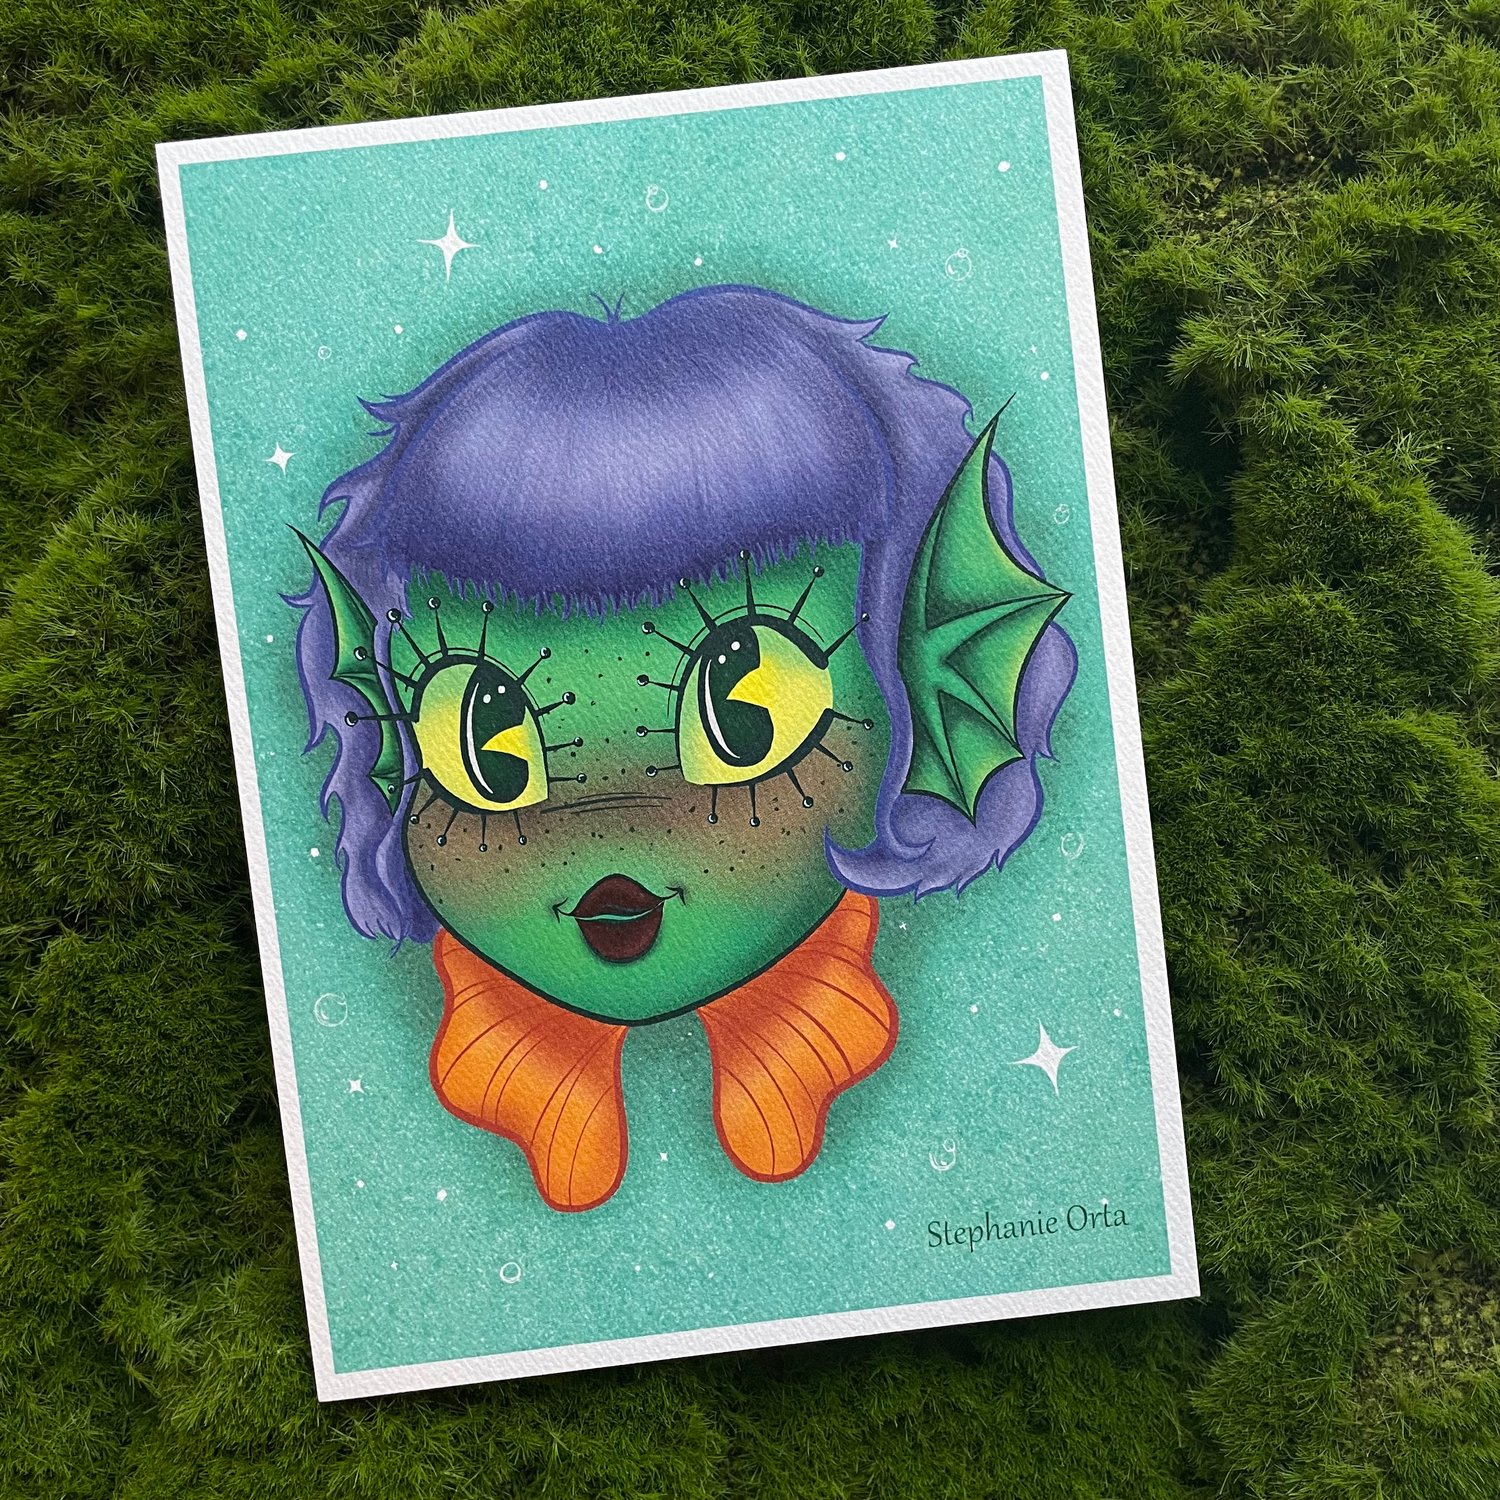 Creature Ghoul 5" x 7" inches Print